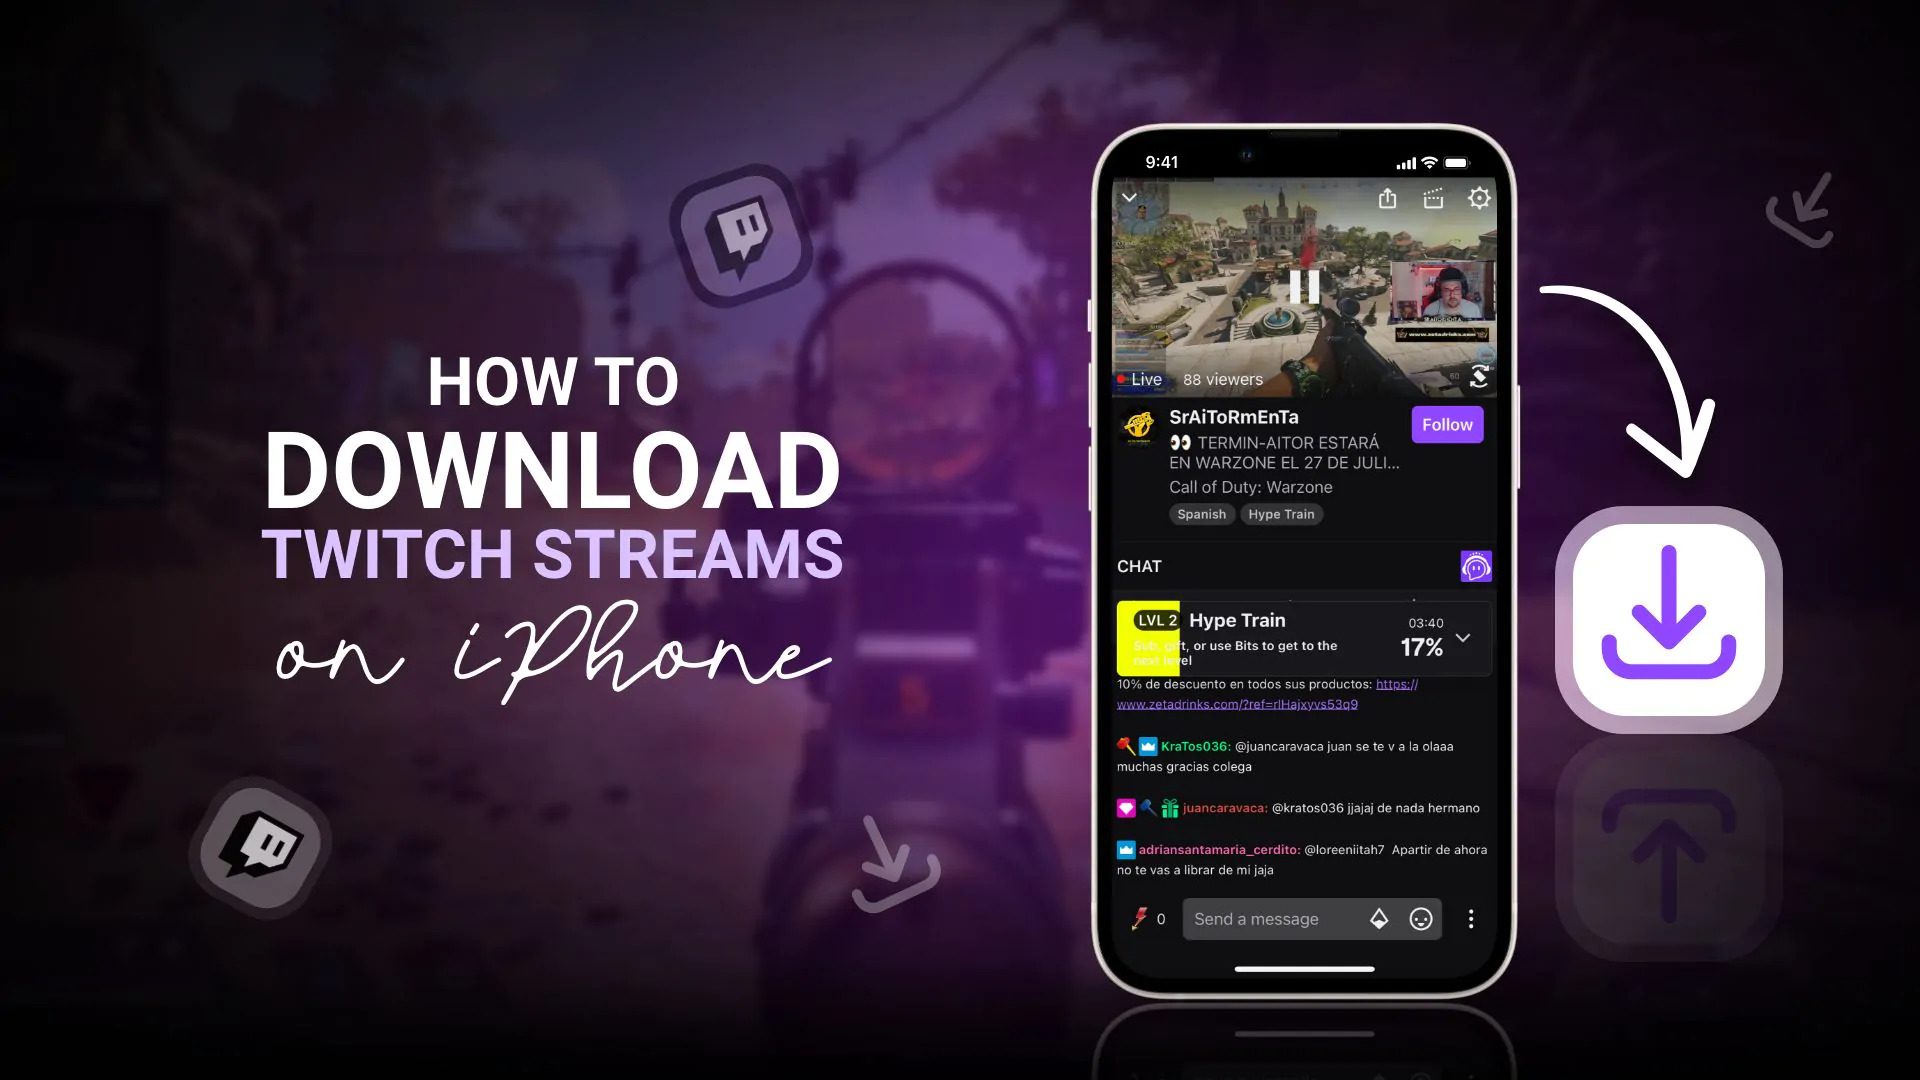 How To Download Twitch Streams On IPhone